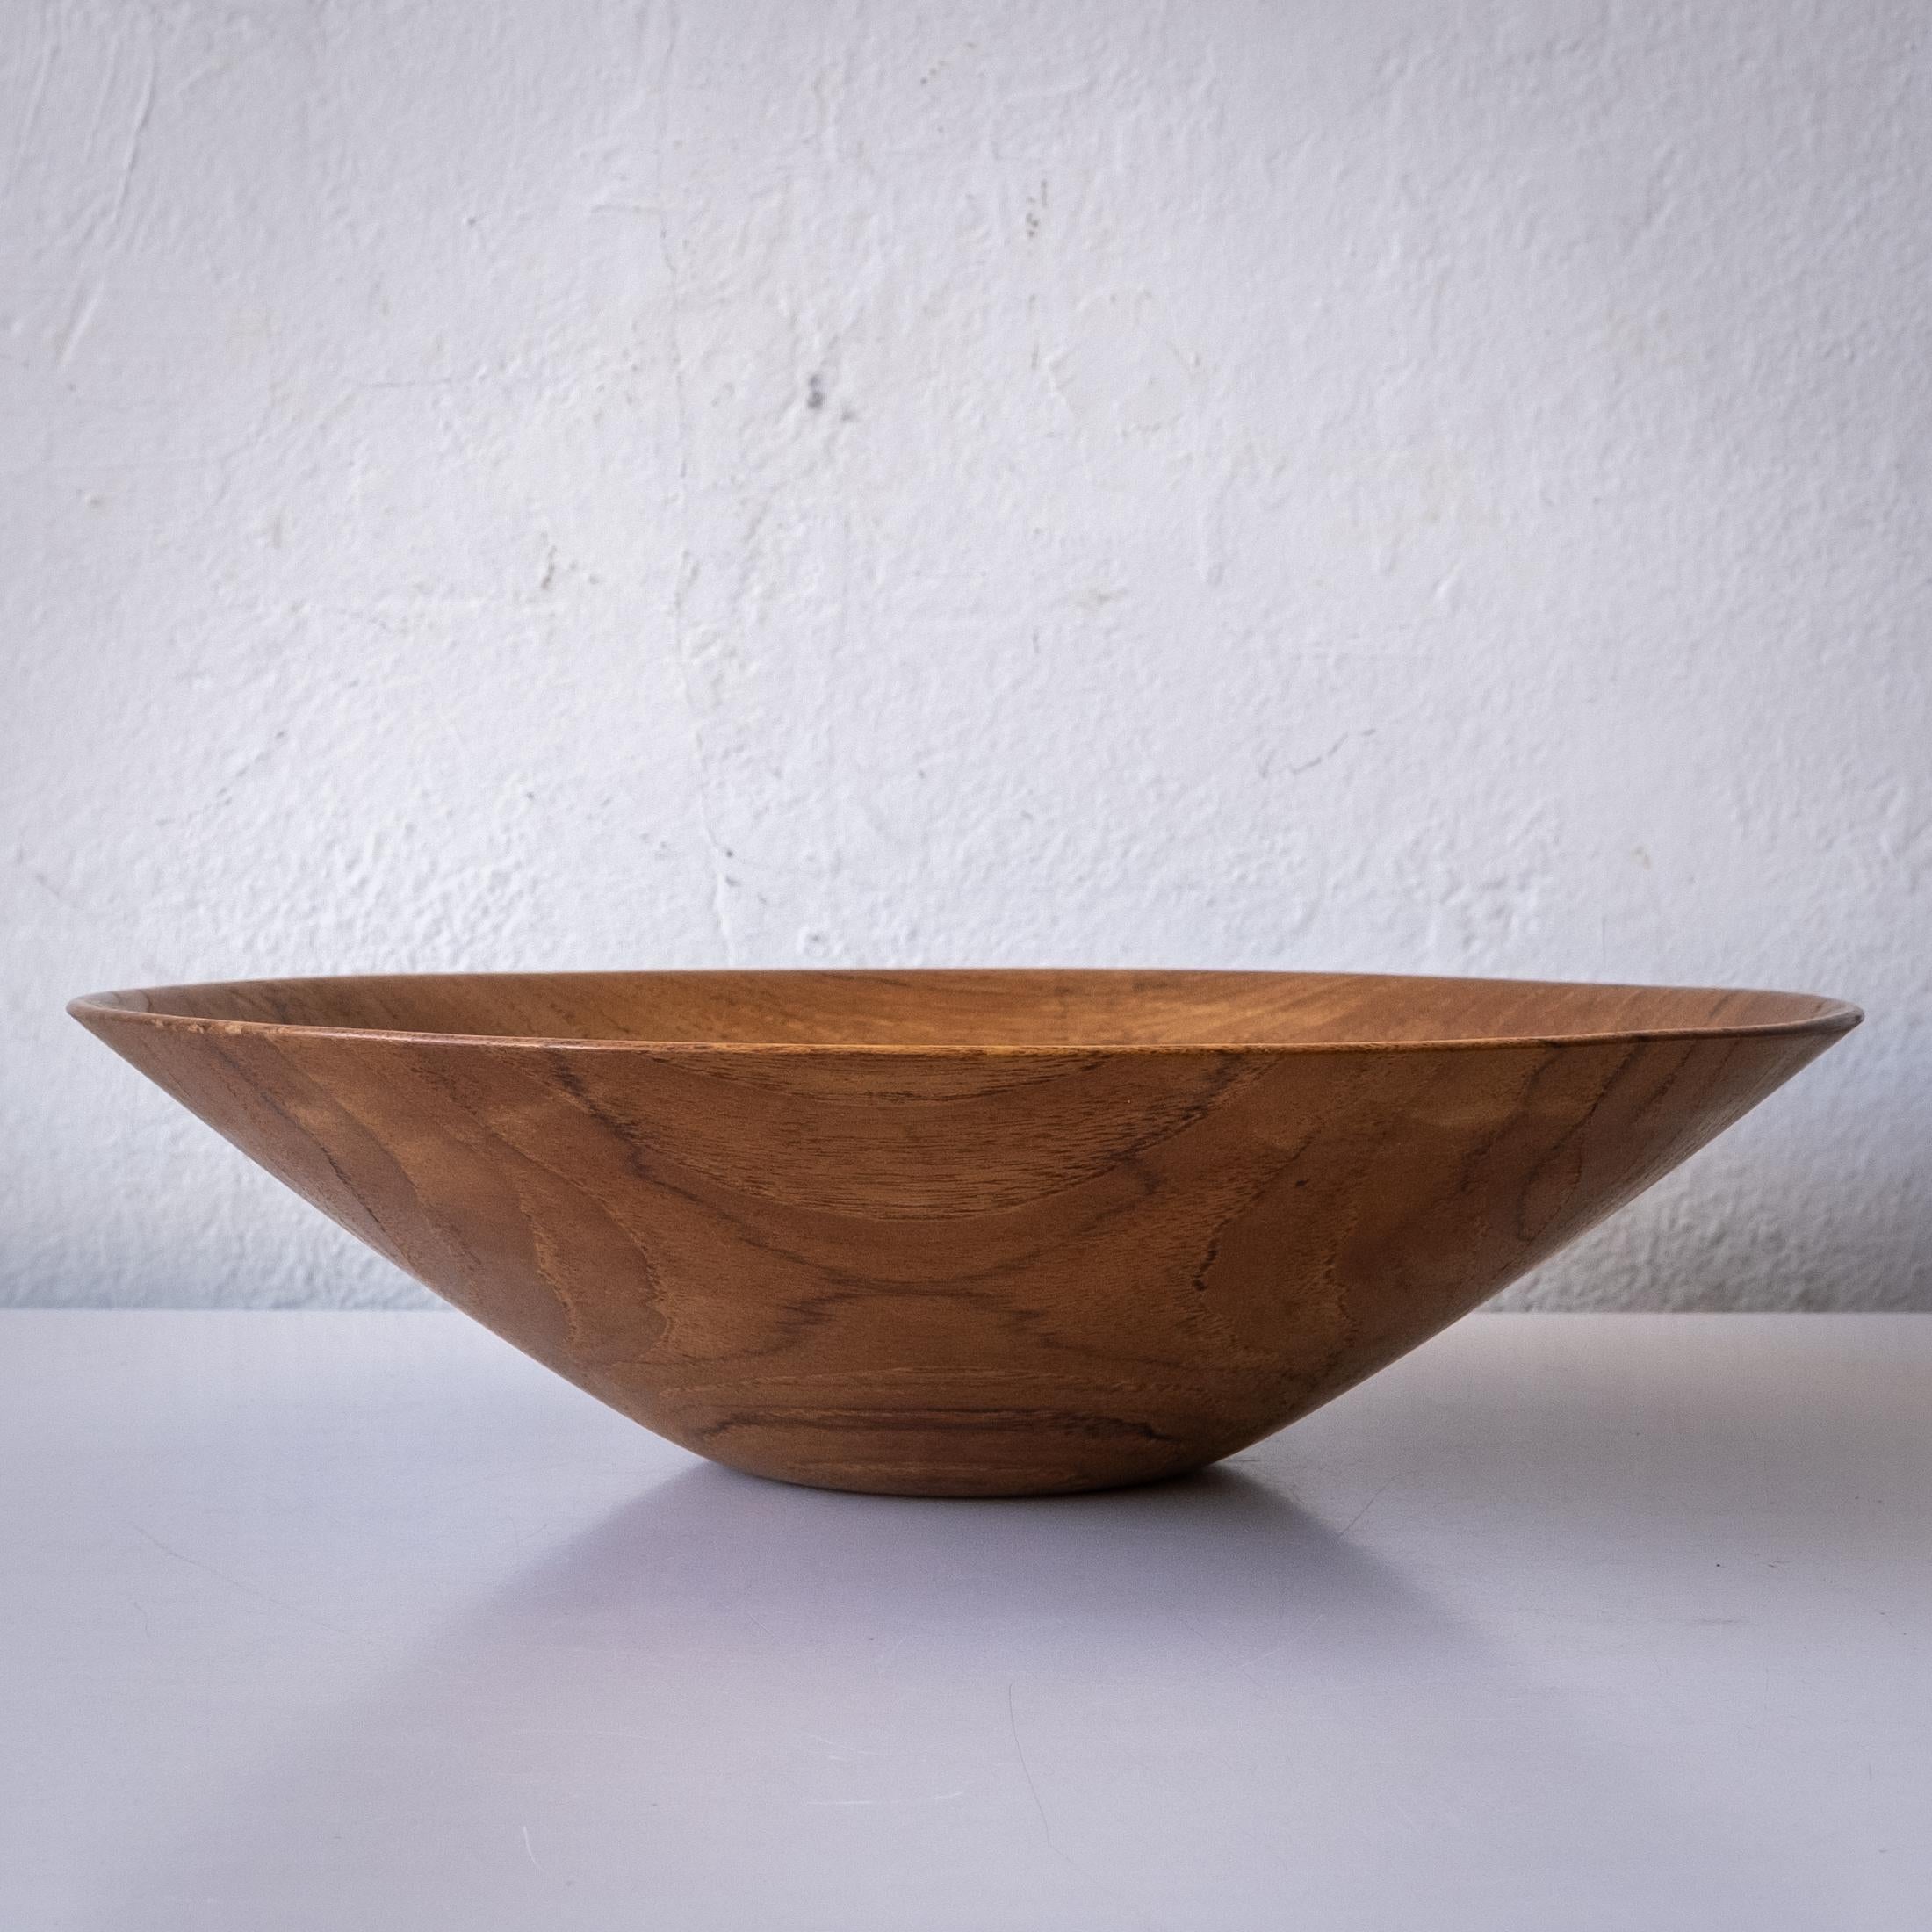 Mid-century turned persimmon wood bowl by Japanese artist Shigemichi Aomine (b. 1916) for the National Craft Council of Japan. 1960s.